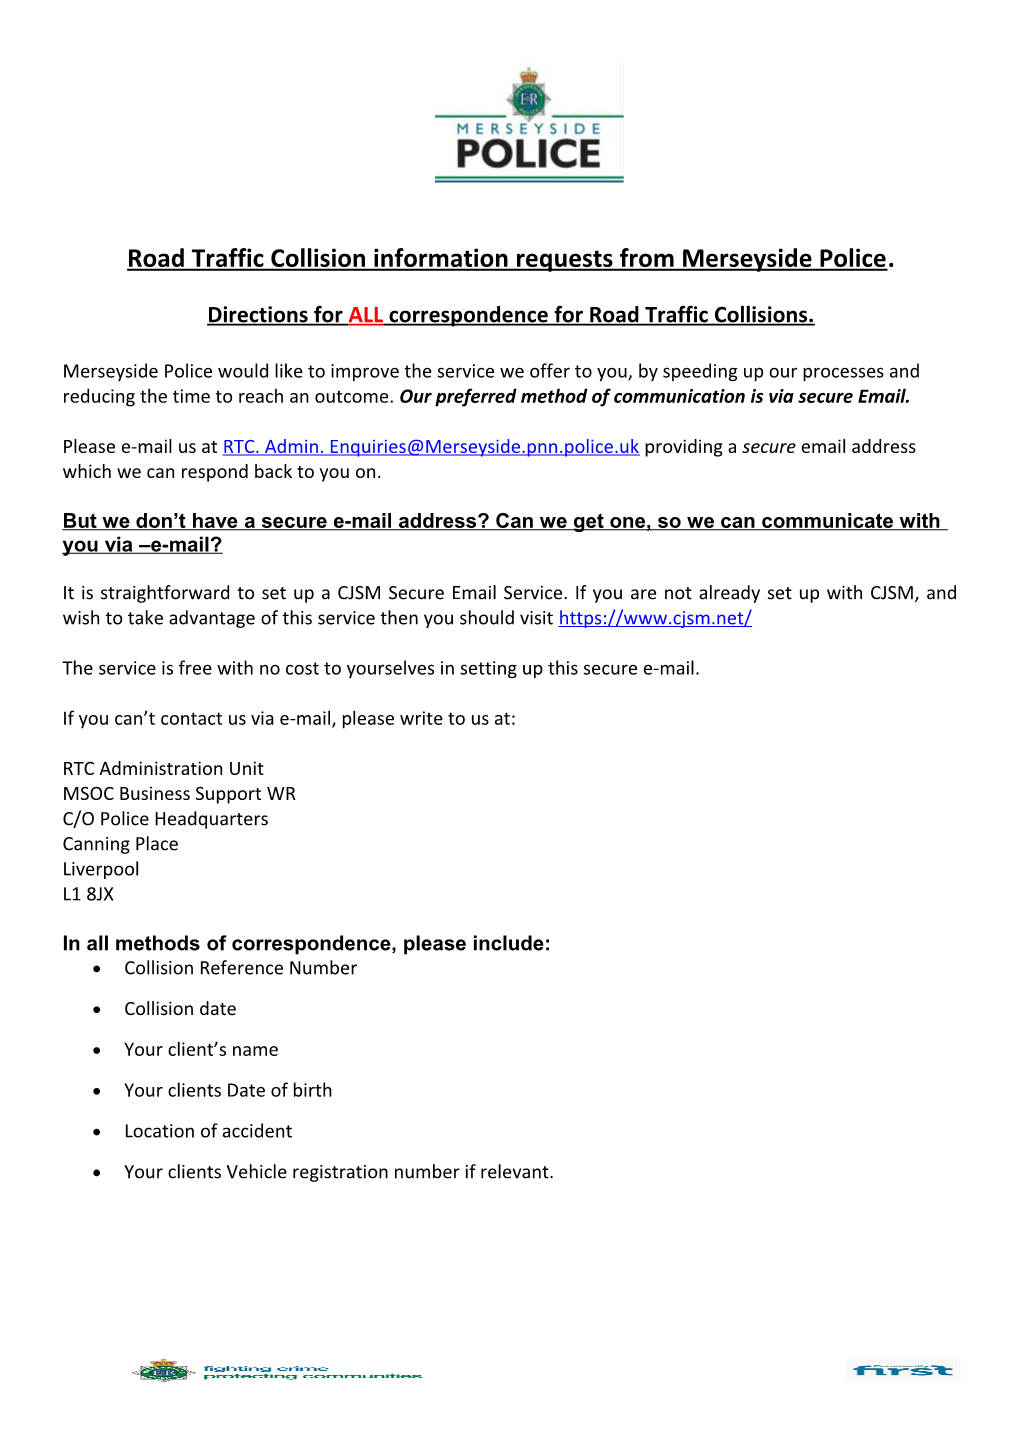 Road Traffic Collision Information Requests from Merseyside Police